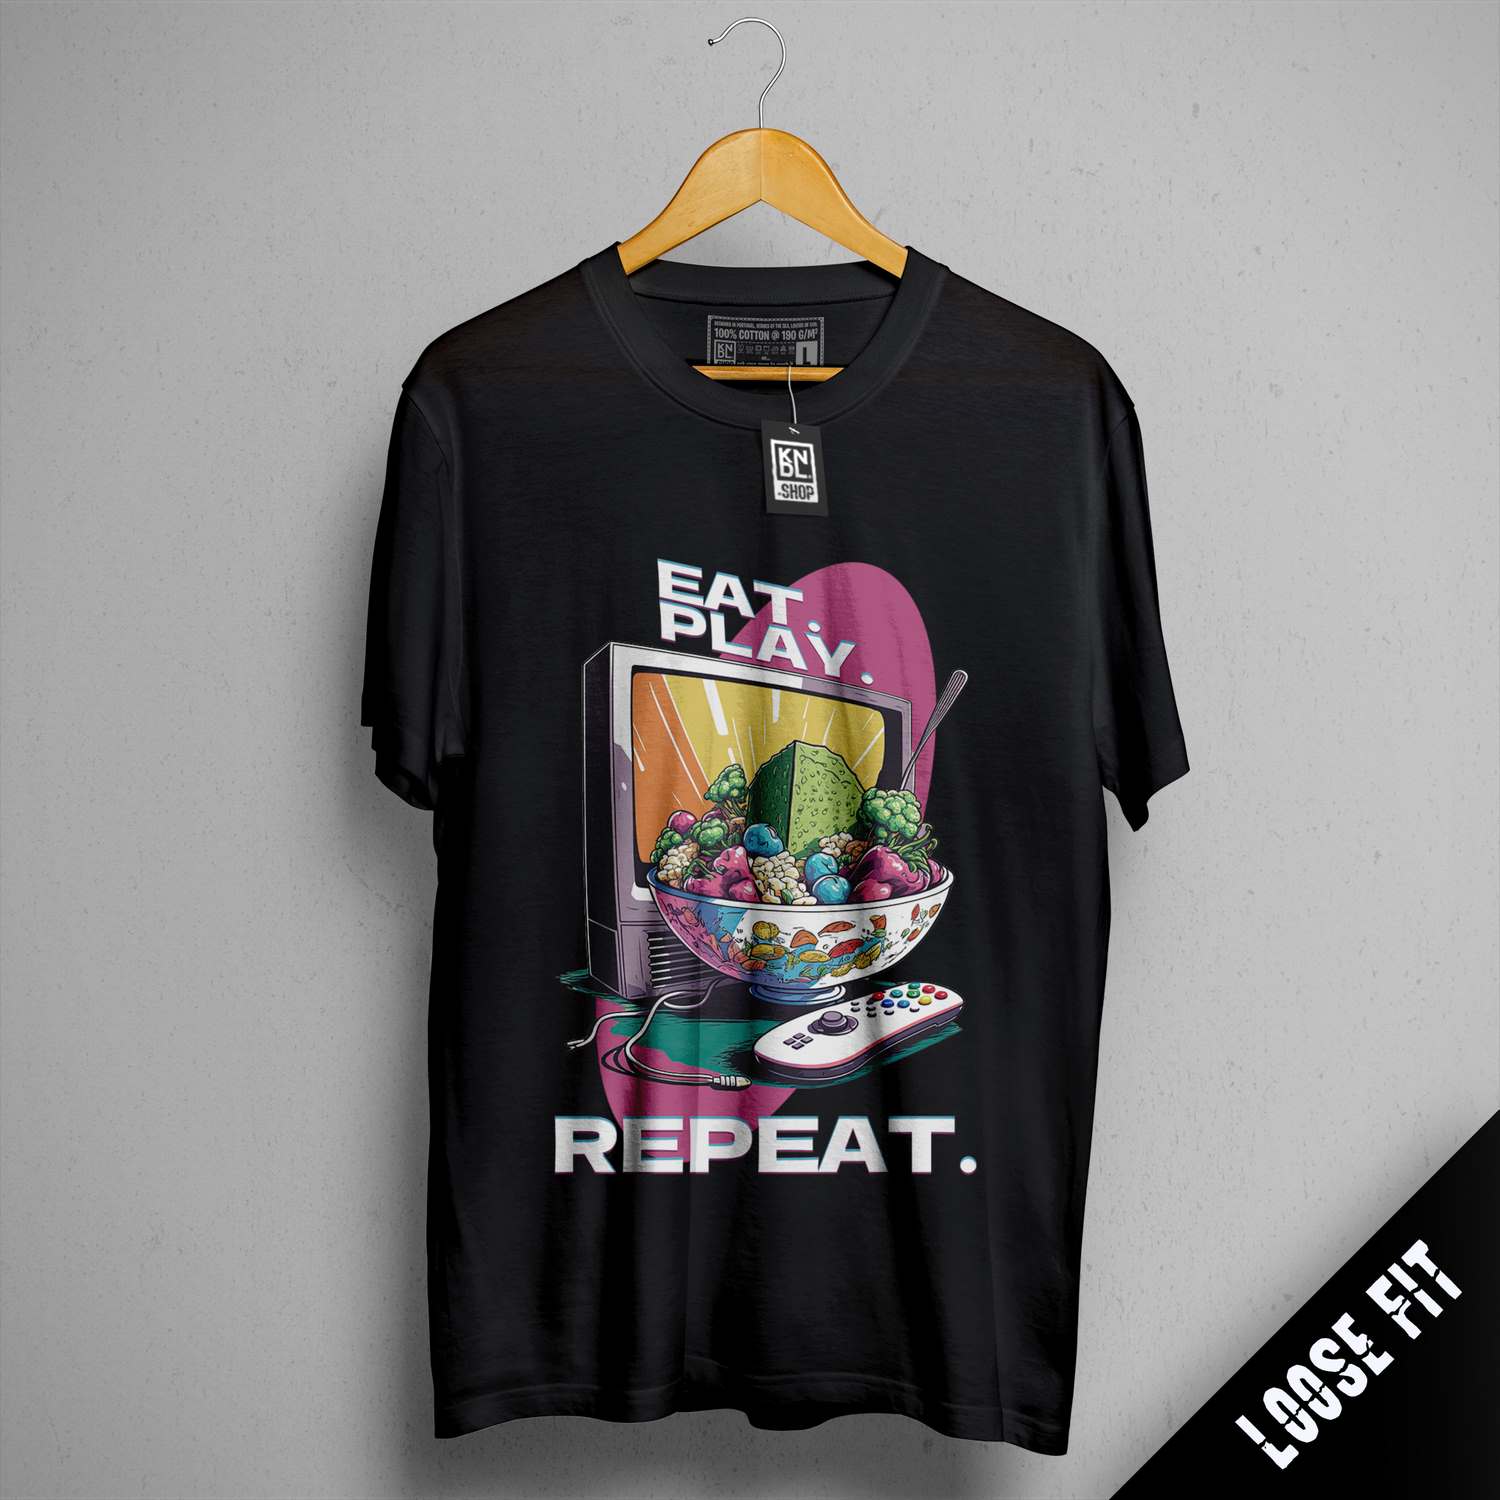 a t - shirt that says eat play repeat